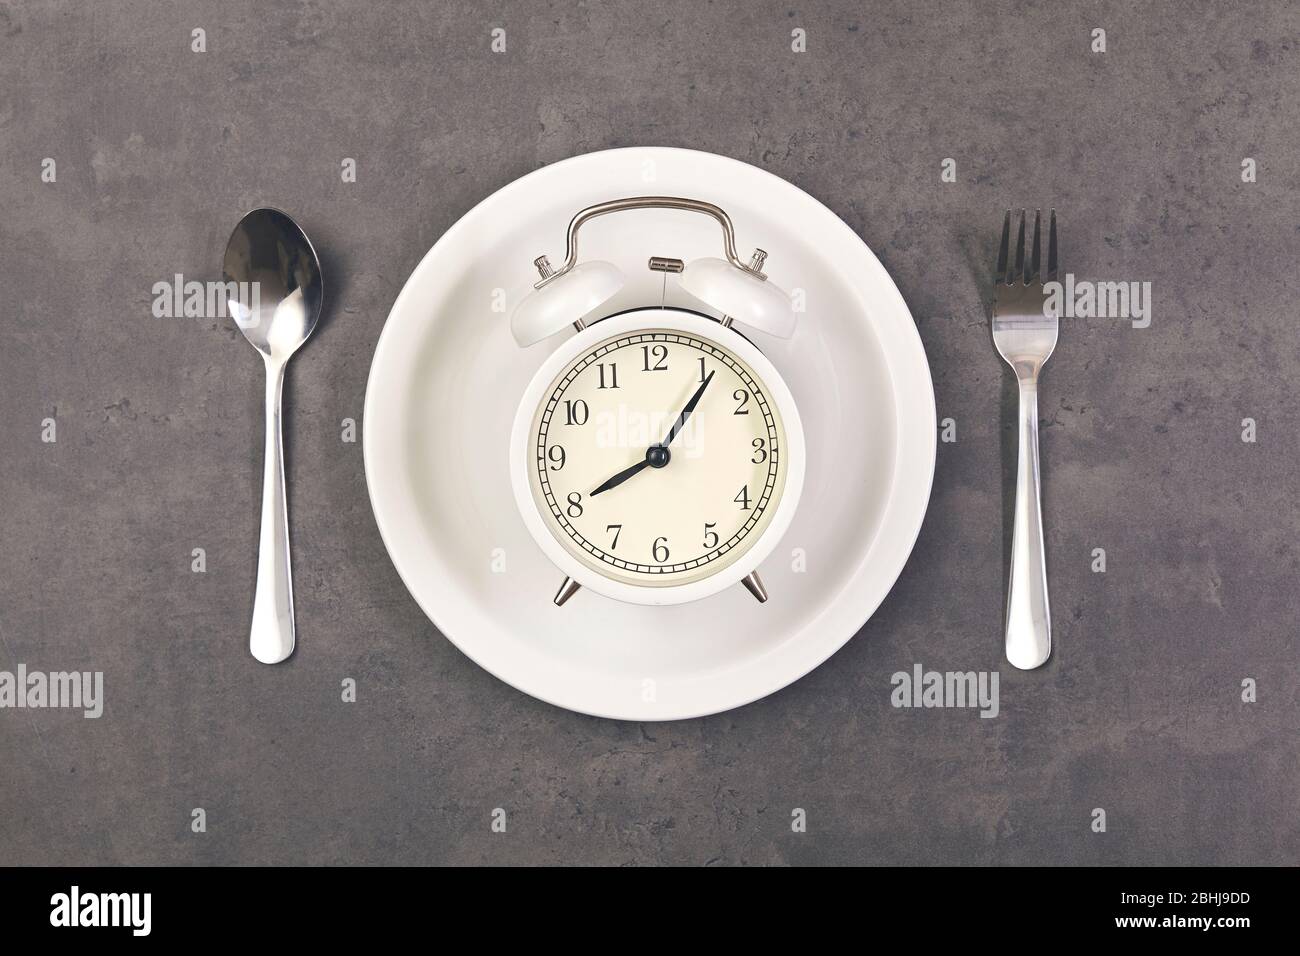 Alarm clock with spoon and fork on plate the table. Time to eat Stock Photo